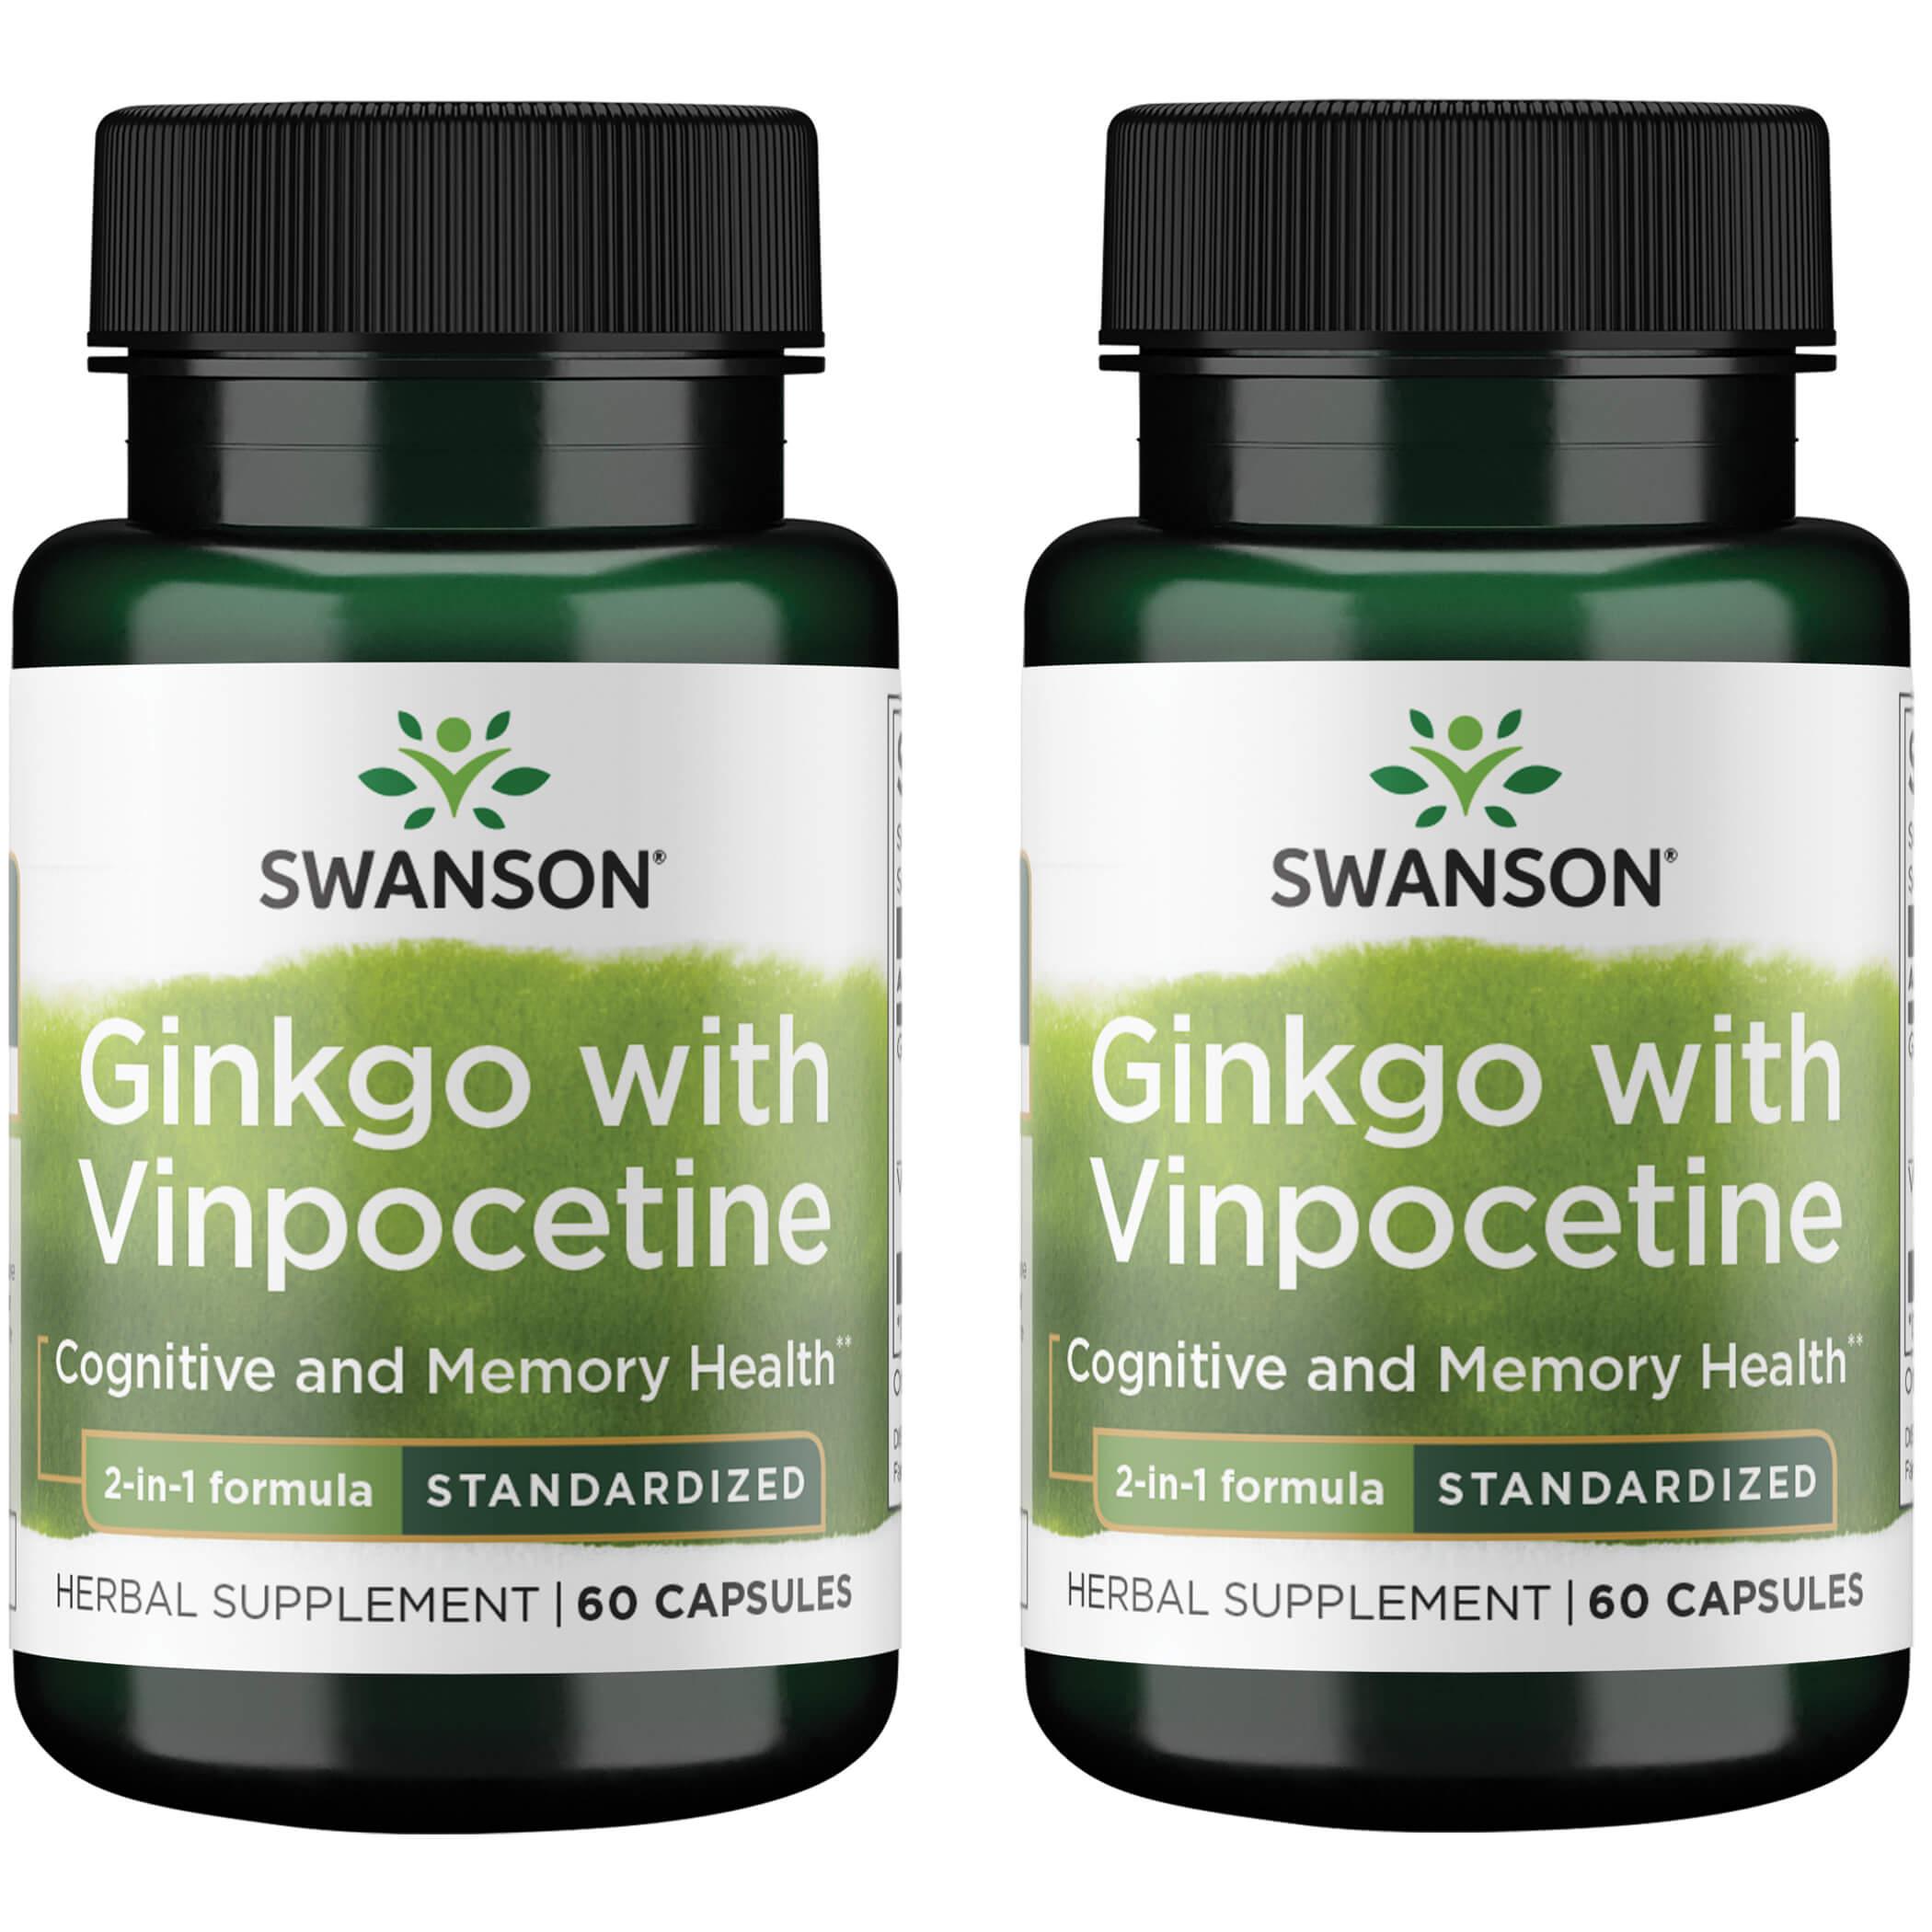 Swanson Superior Herbs Ginkgo with Vinpocetine - Standardized 2 Pack Vitamin 60 Caps